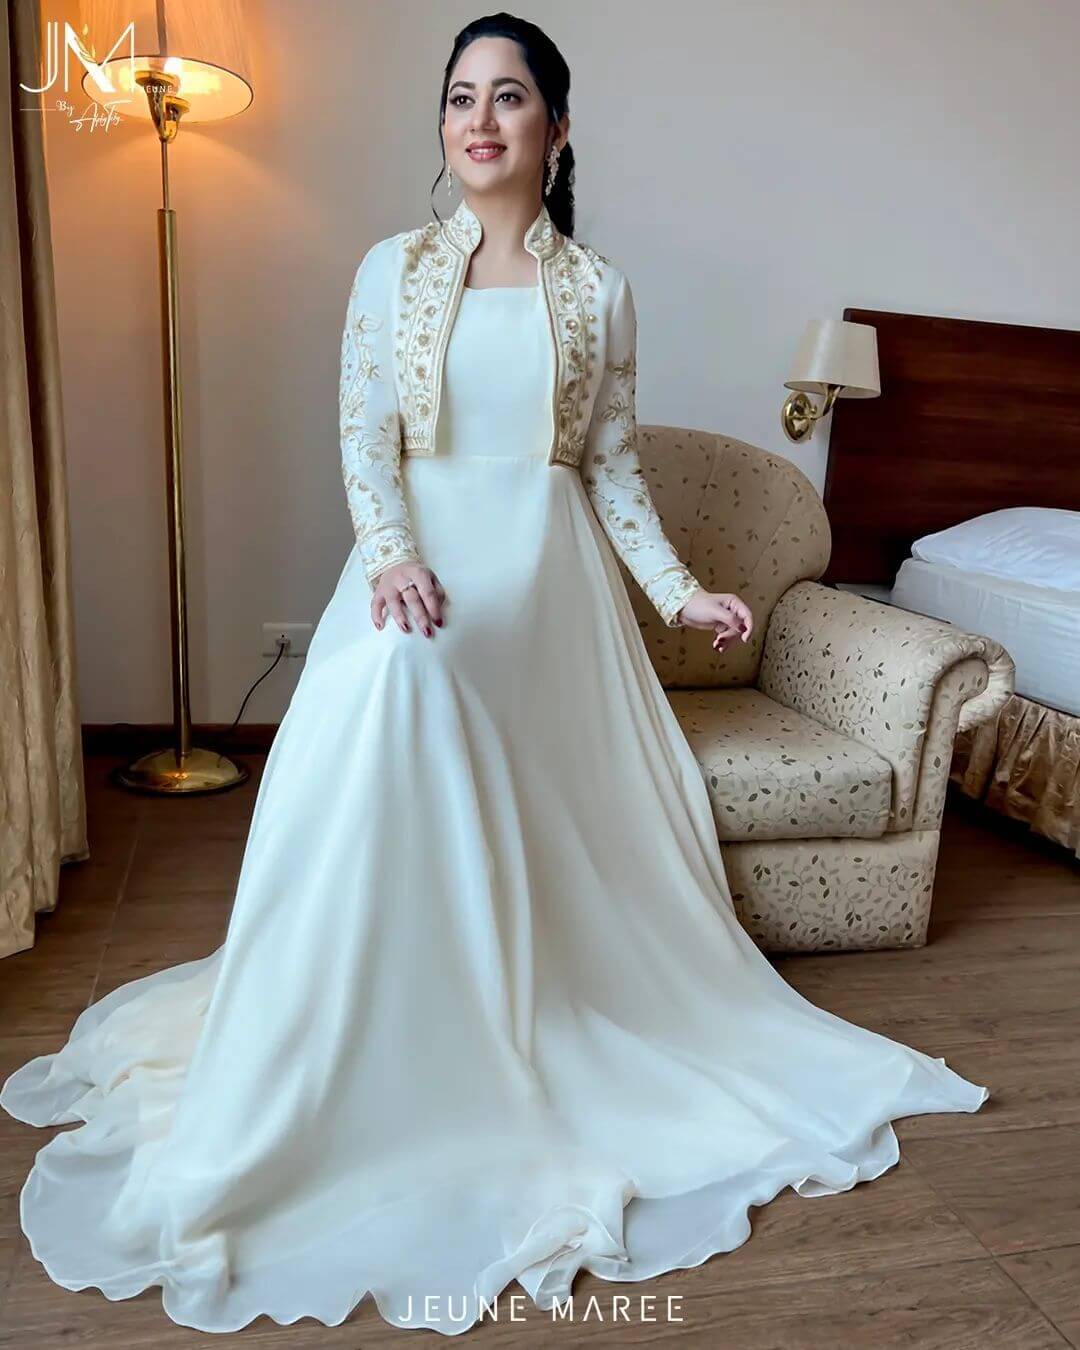 Miya George Look Elegant In White Plain Fit & Flare Gown With Full Sleeves Embroidered Jacket Traditional & Western Looks